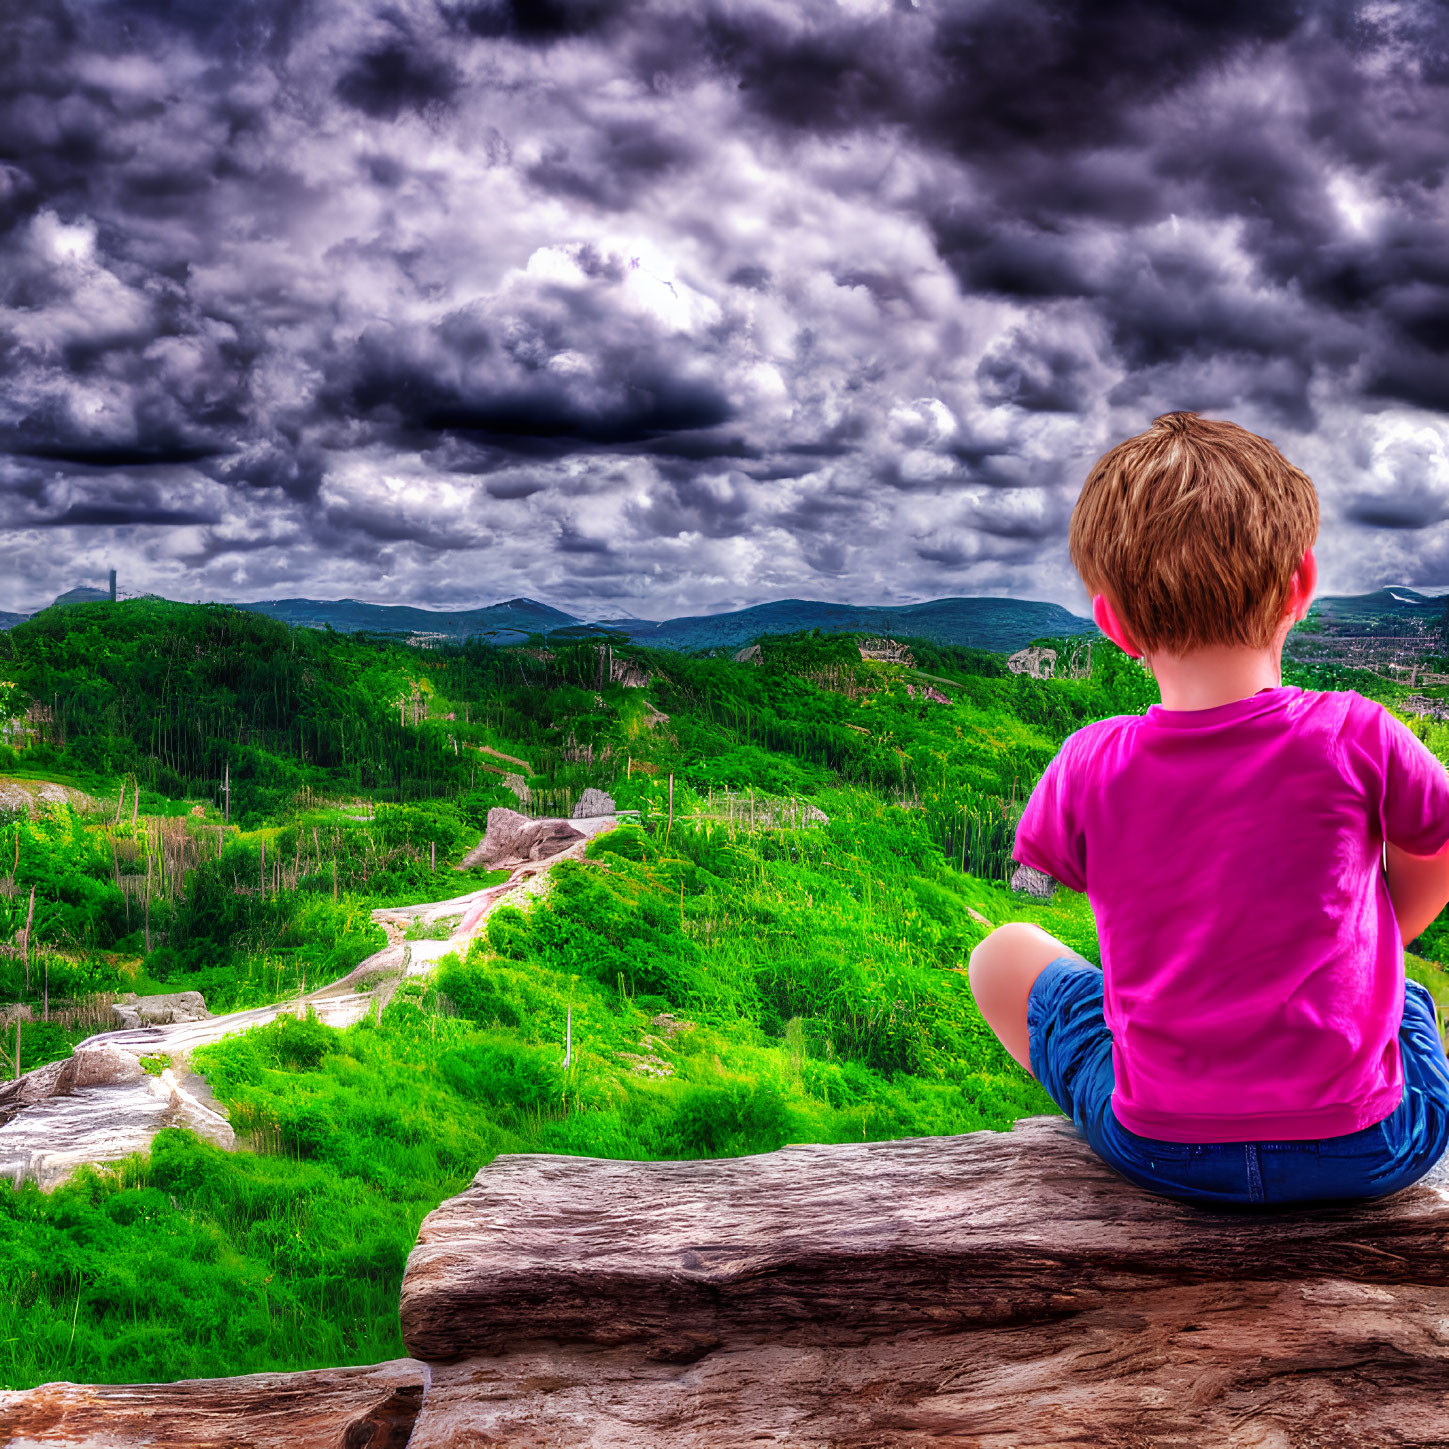 Child admiring scenic landscape with forests and dramatic sky